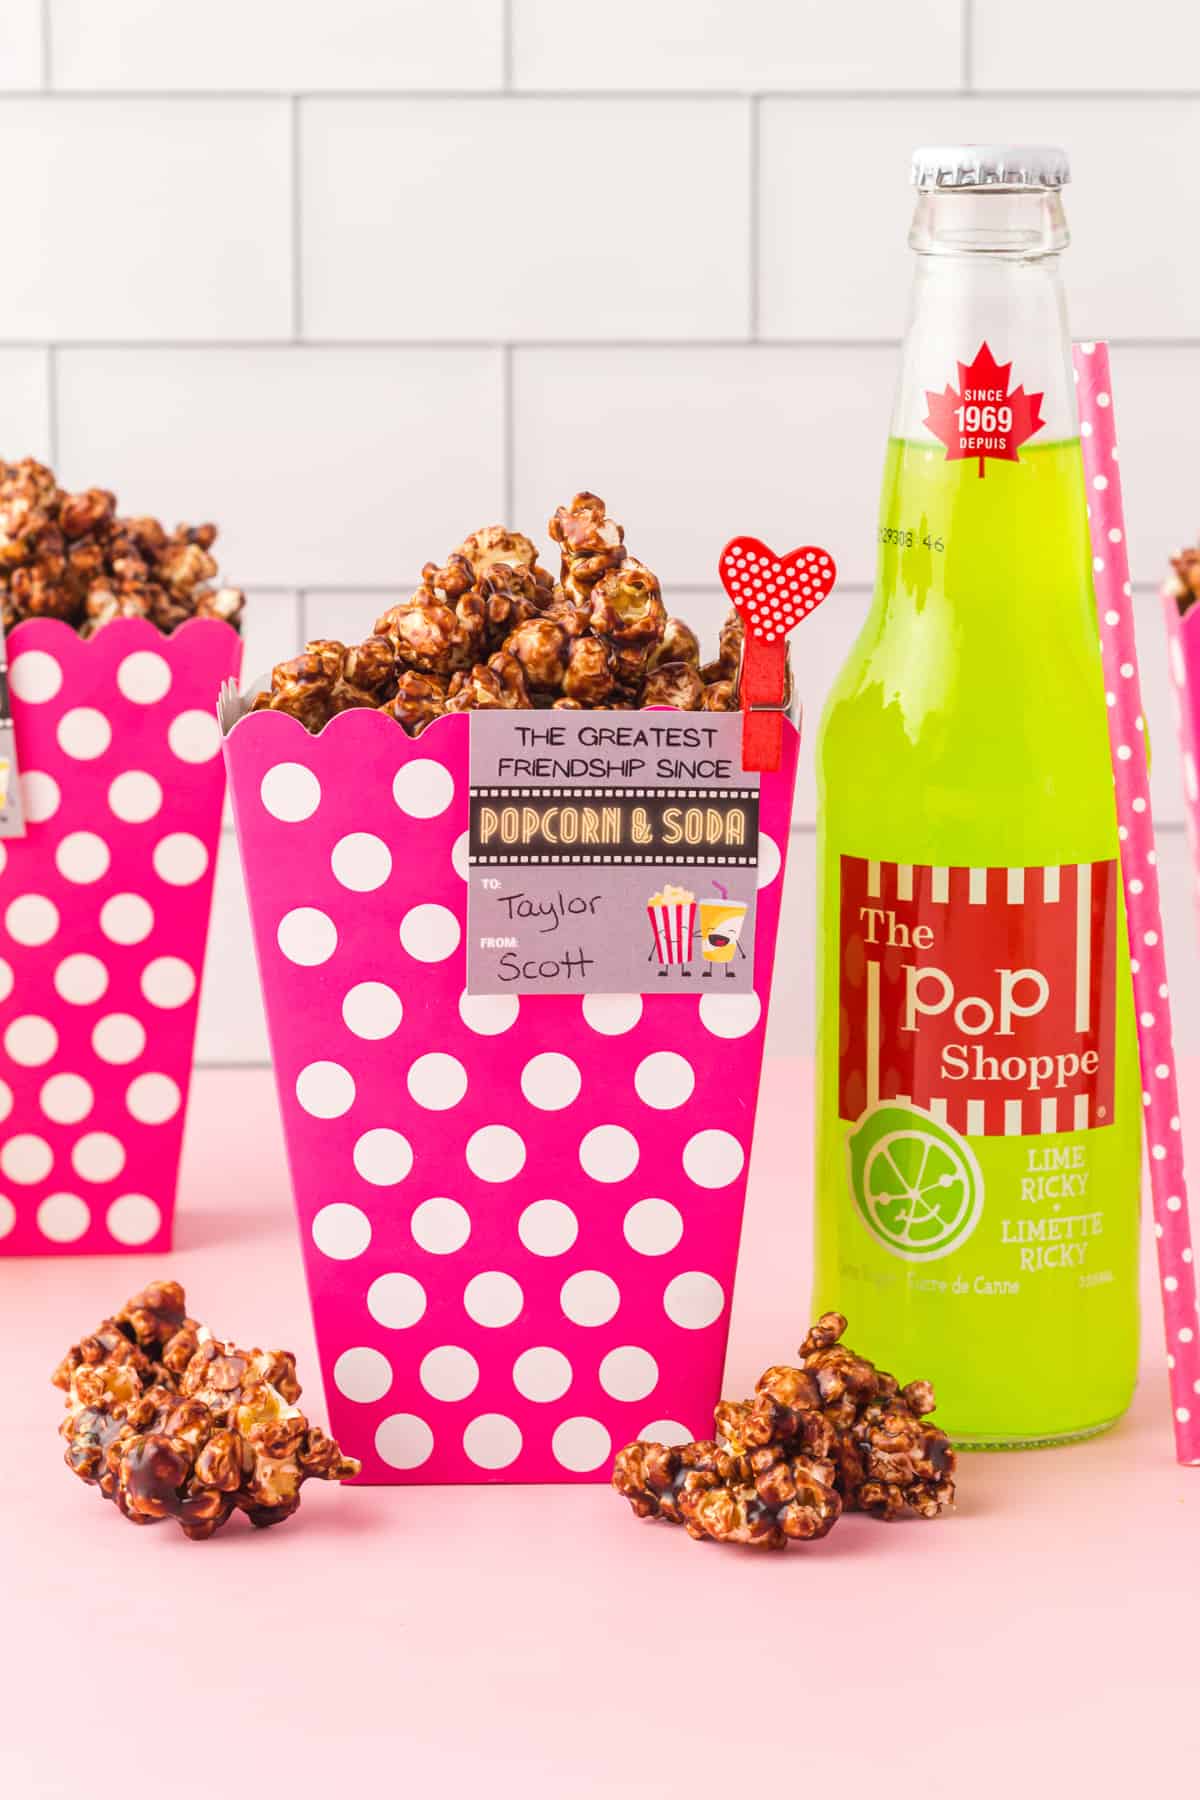 chocolate popcorn in a pink and white popcorn container next to a lime bottle of soda